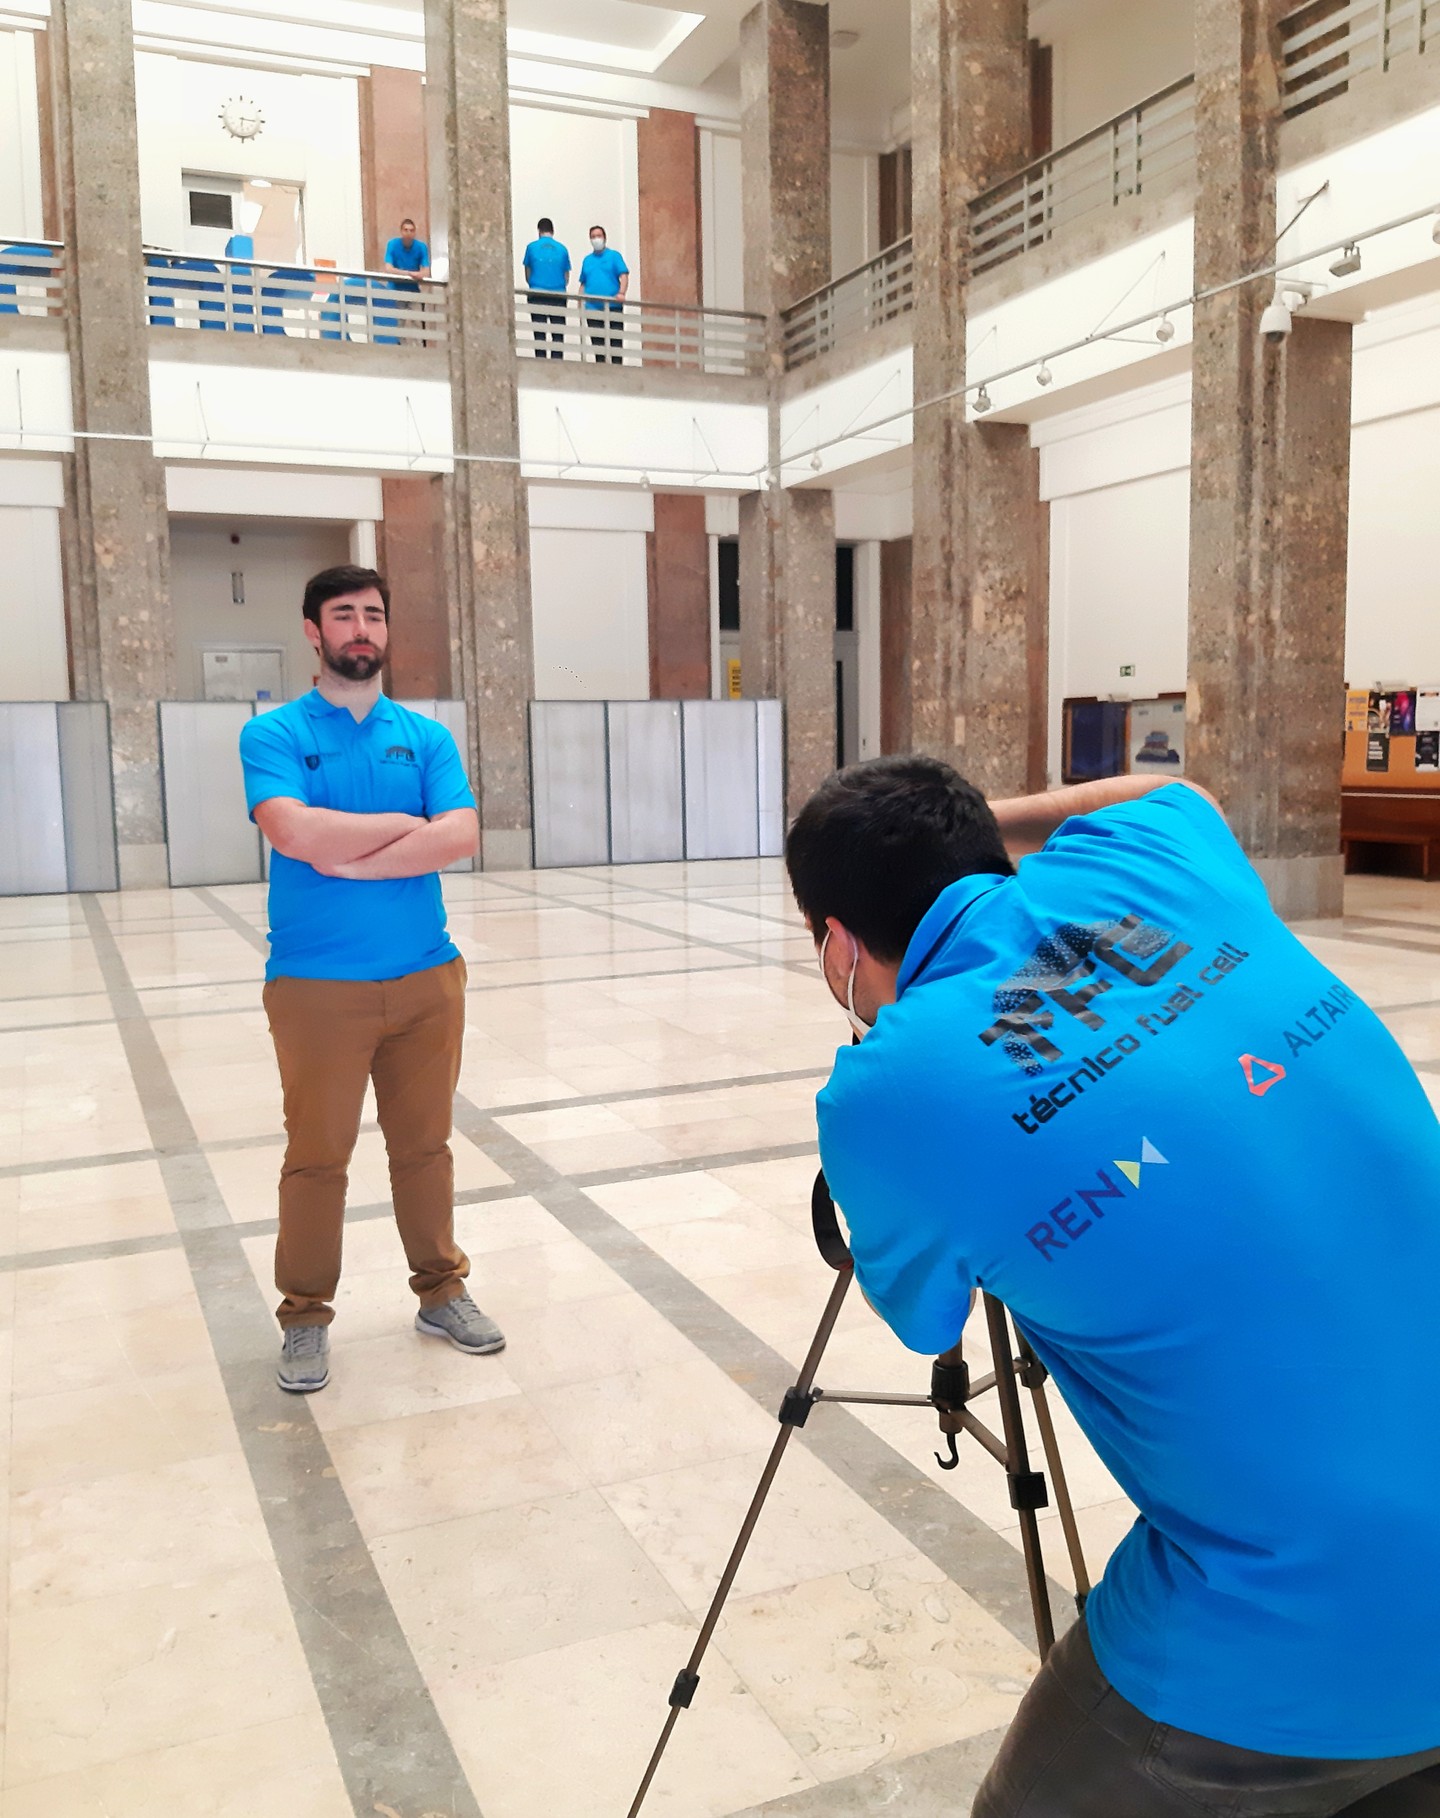 Photoshoot day 📸 at @tecnico_lisboa's historical Pavilhão Central 

#sustainability #hydrogen #greenhydrogen #hydrogen #mobility #ShellEcoMarathon #FuelCell #FCEV 
@ren.pt @altairengineering @emetres_m3 @santanderpt @ipdj_ip